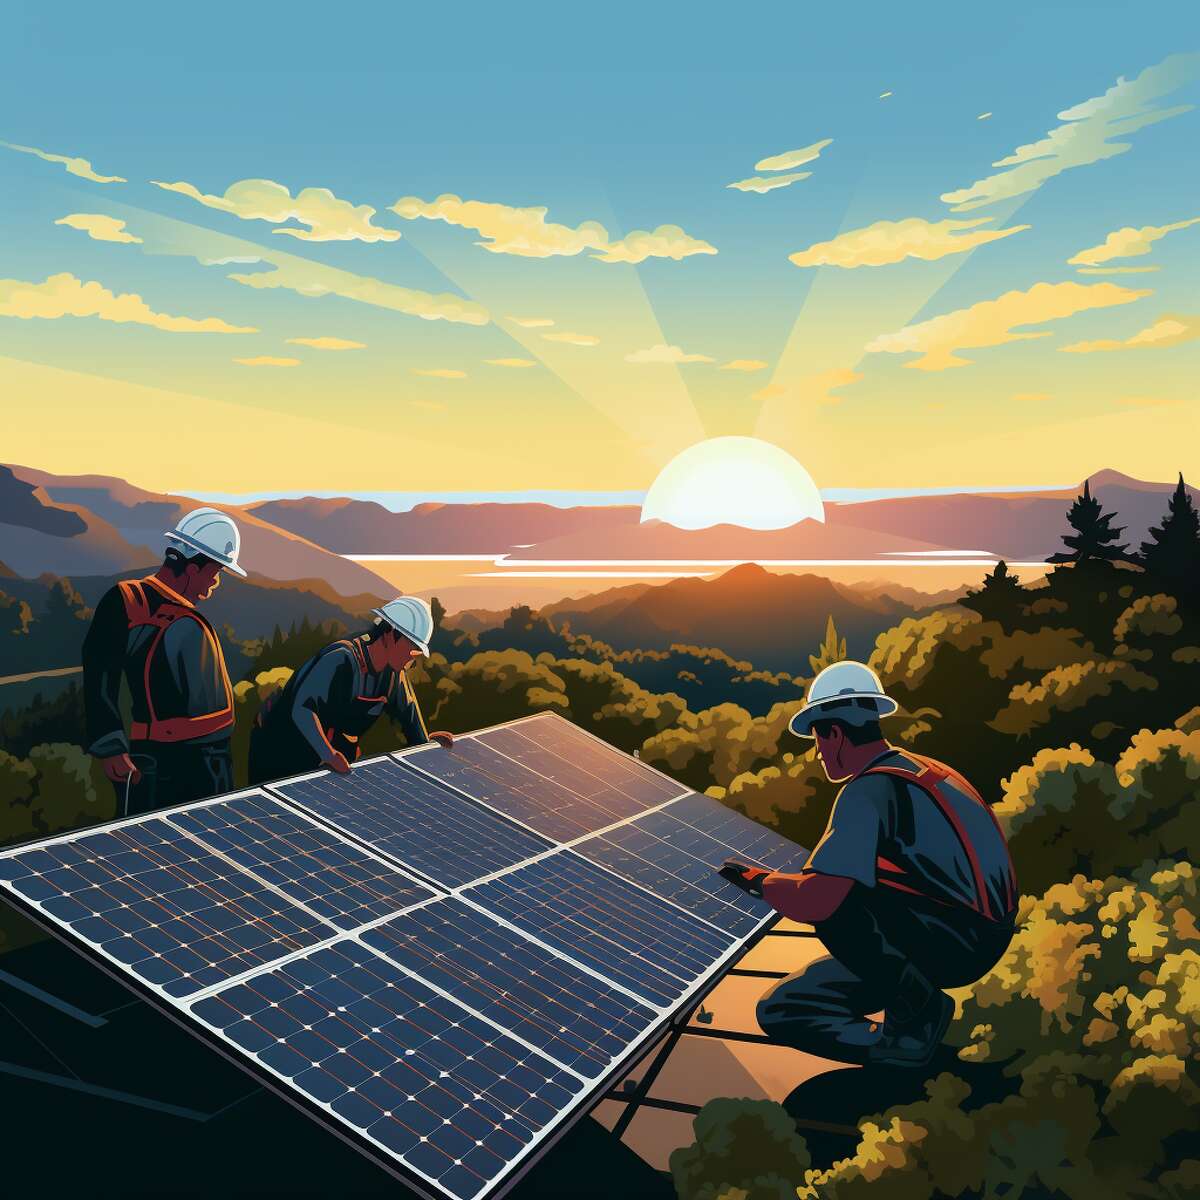 men install a solar panel as a sun rises in the distance